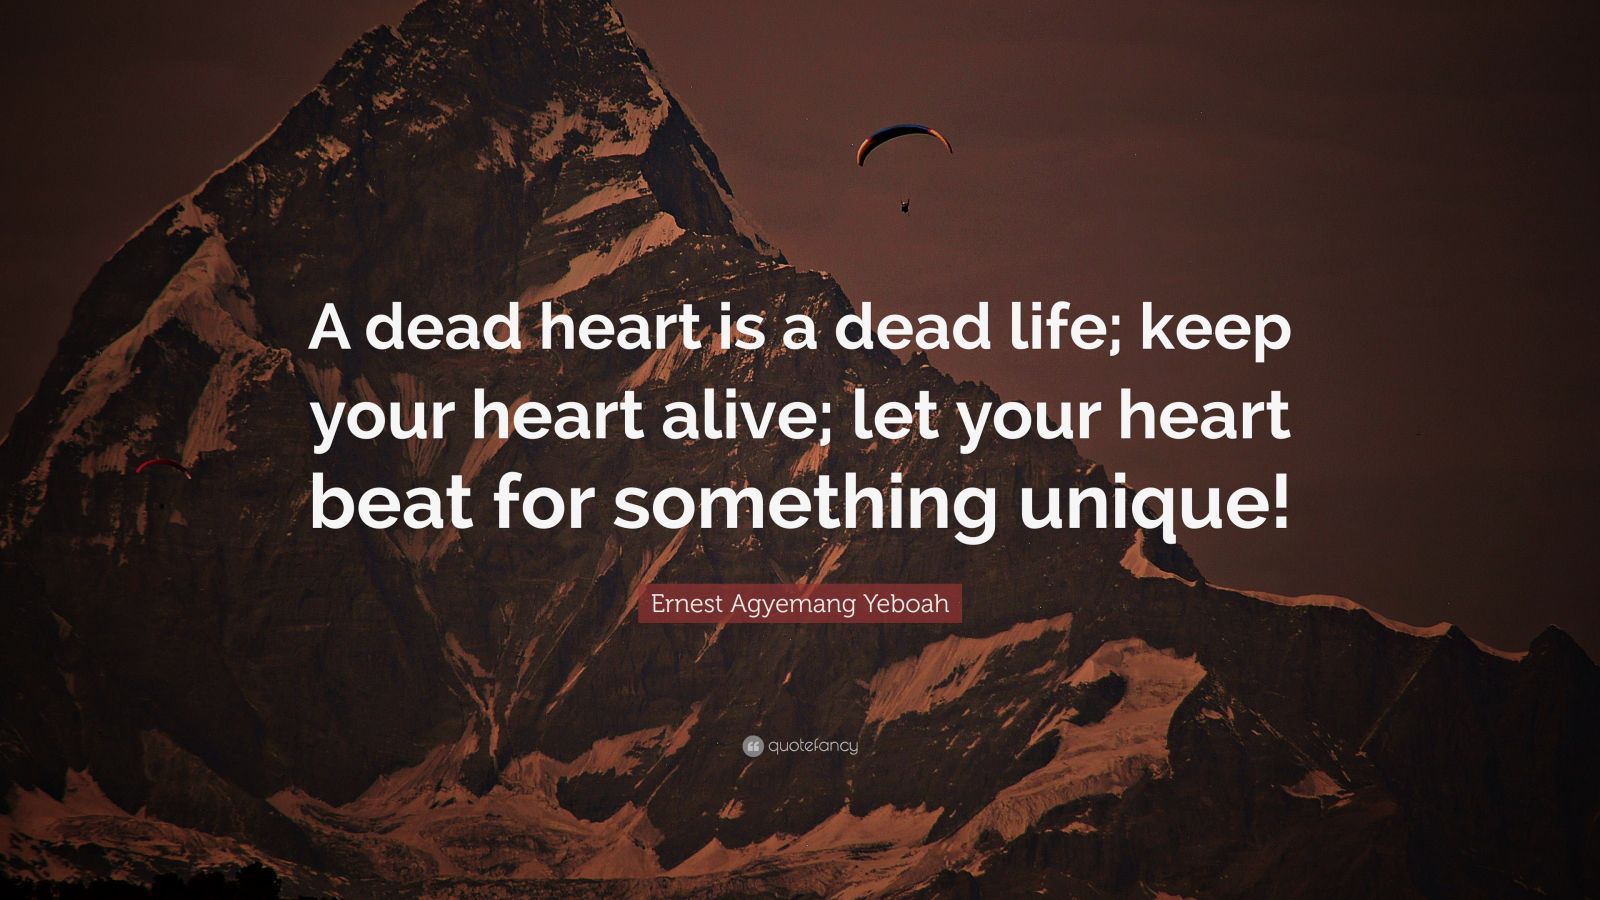 Ernest Agyemang Yeboah Quote: “A dead heart is a dead life; keep your ...